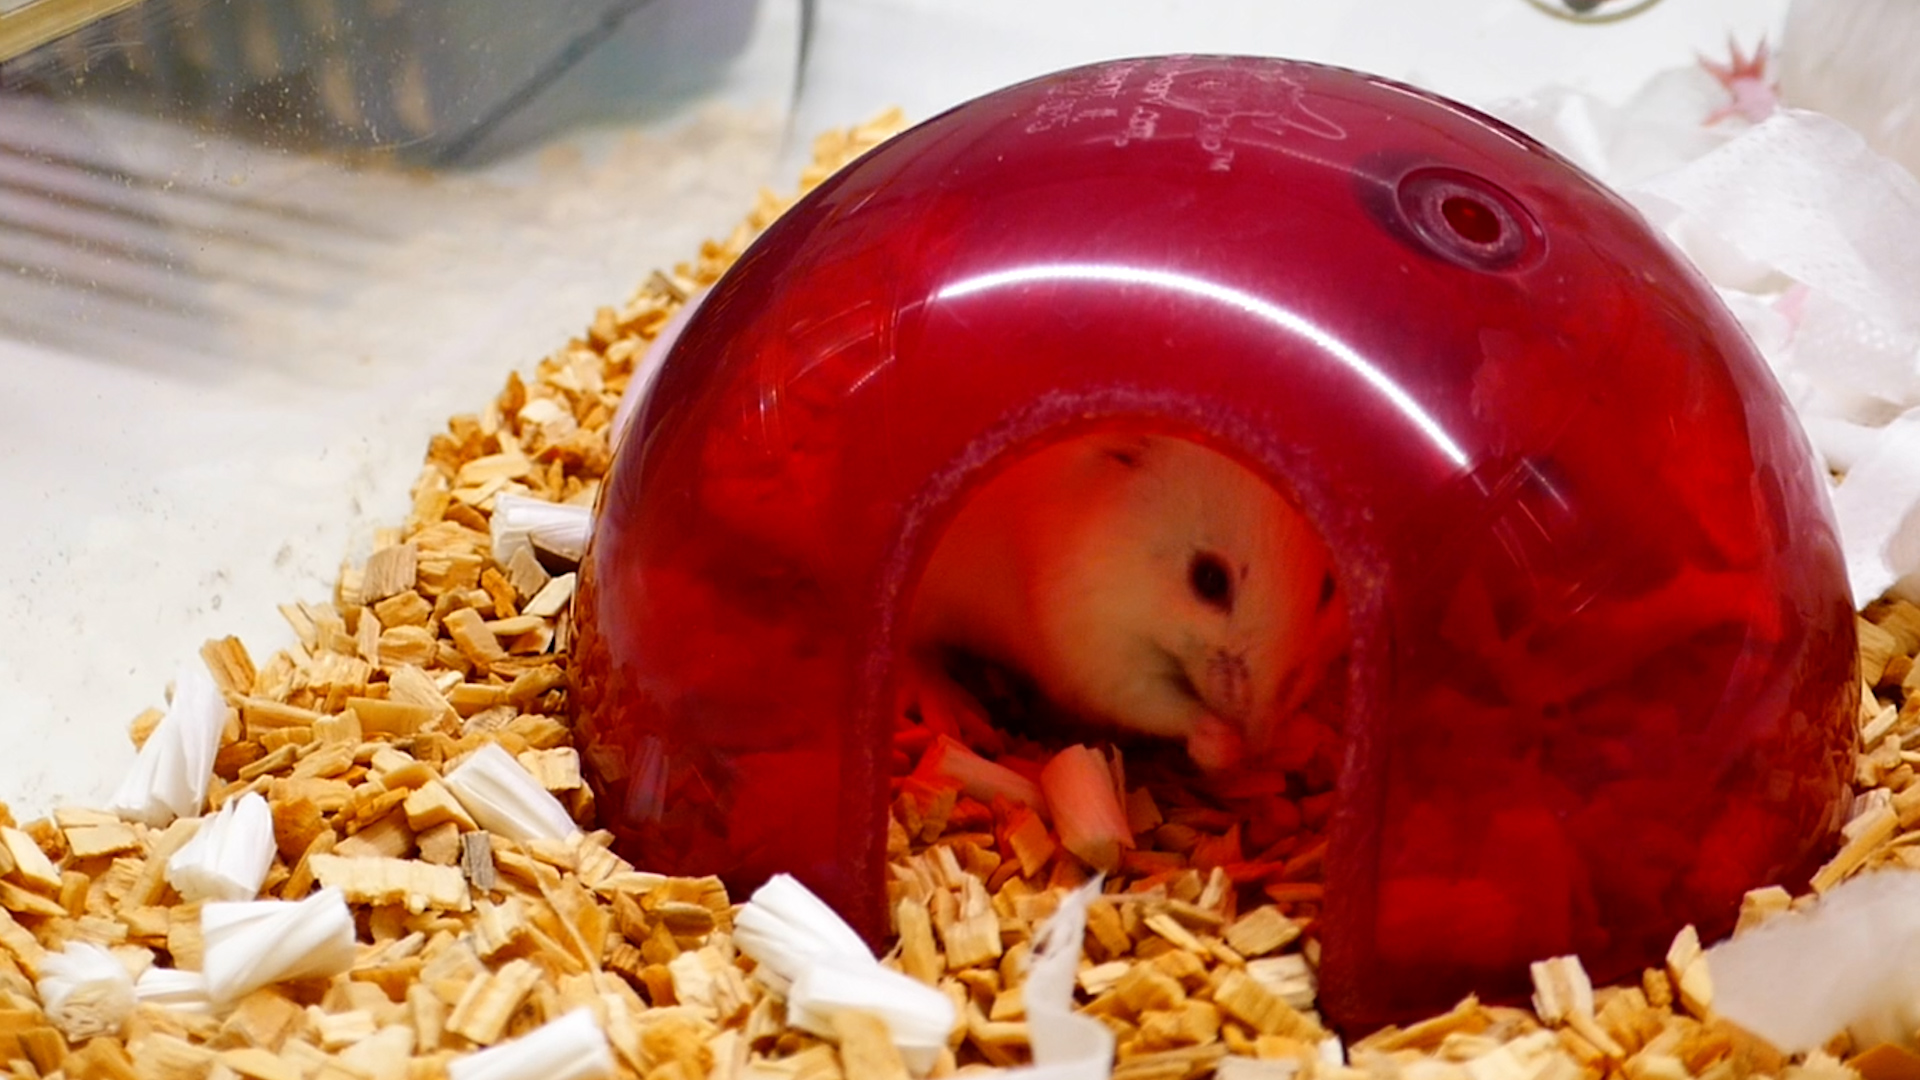 Mouse grooming itself in a red igloo